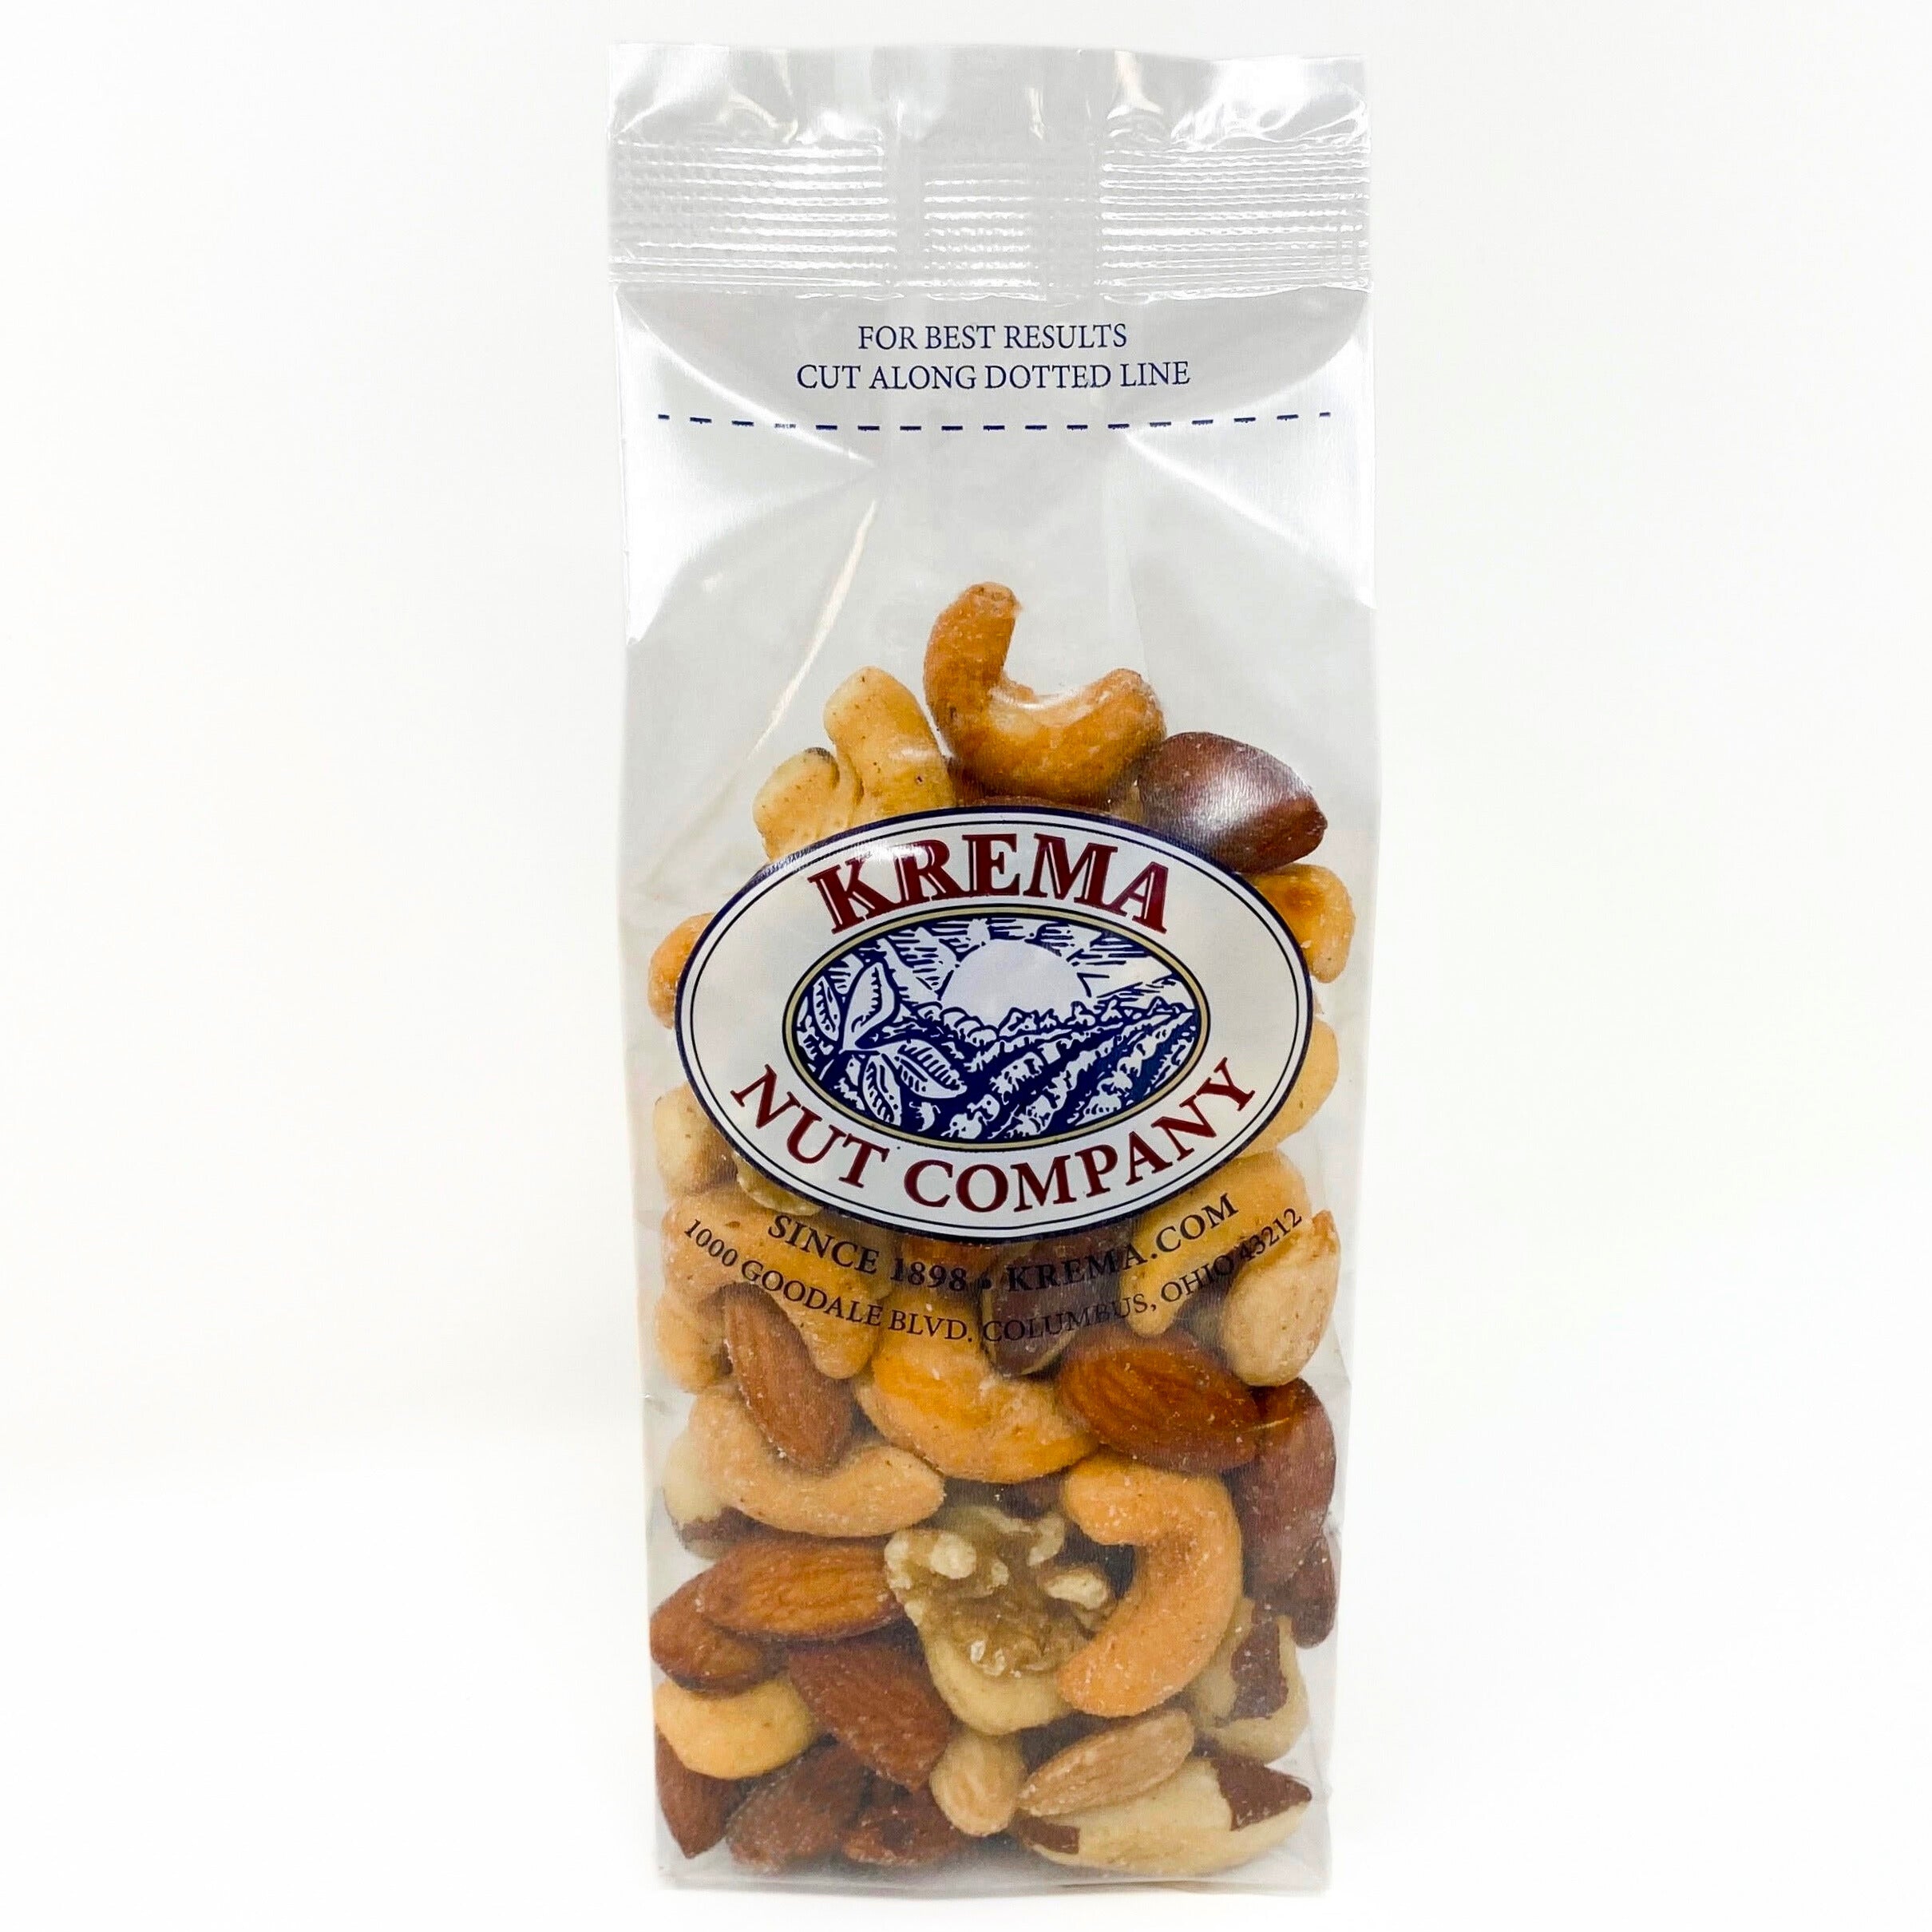 Gourmet Mixed Nuts, Roasted & Salted 16 oz. Bag